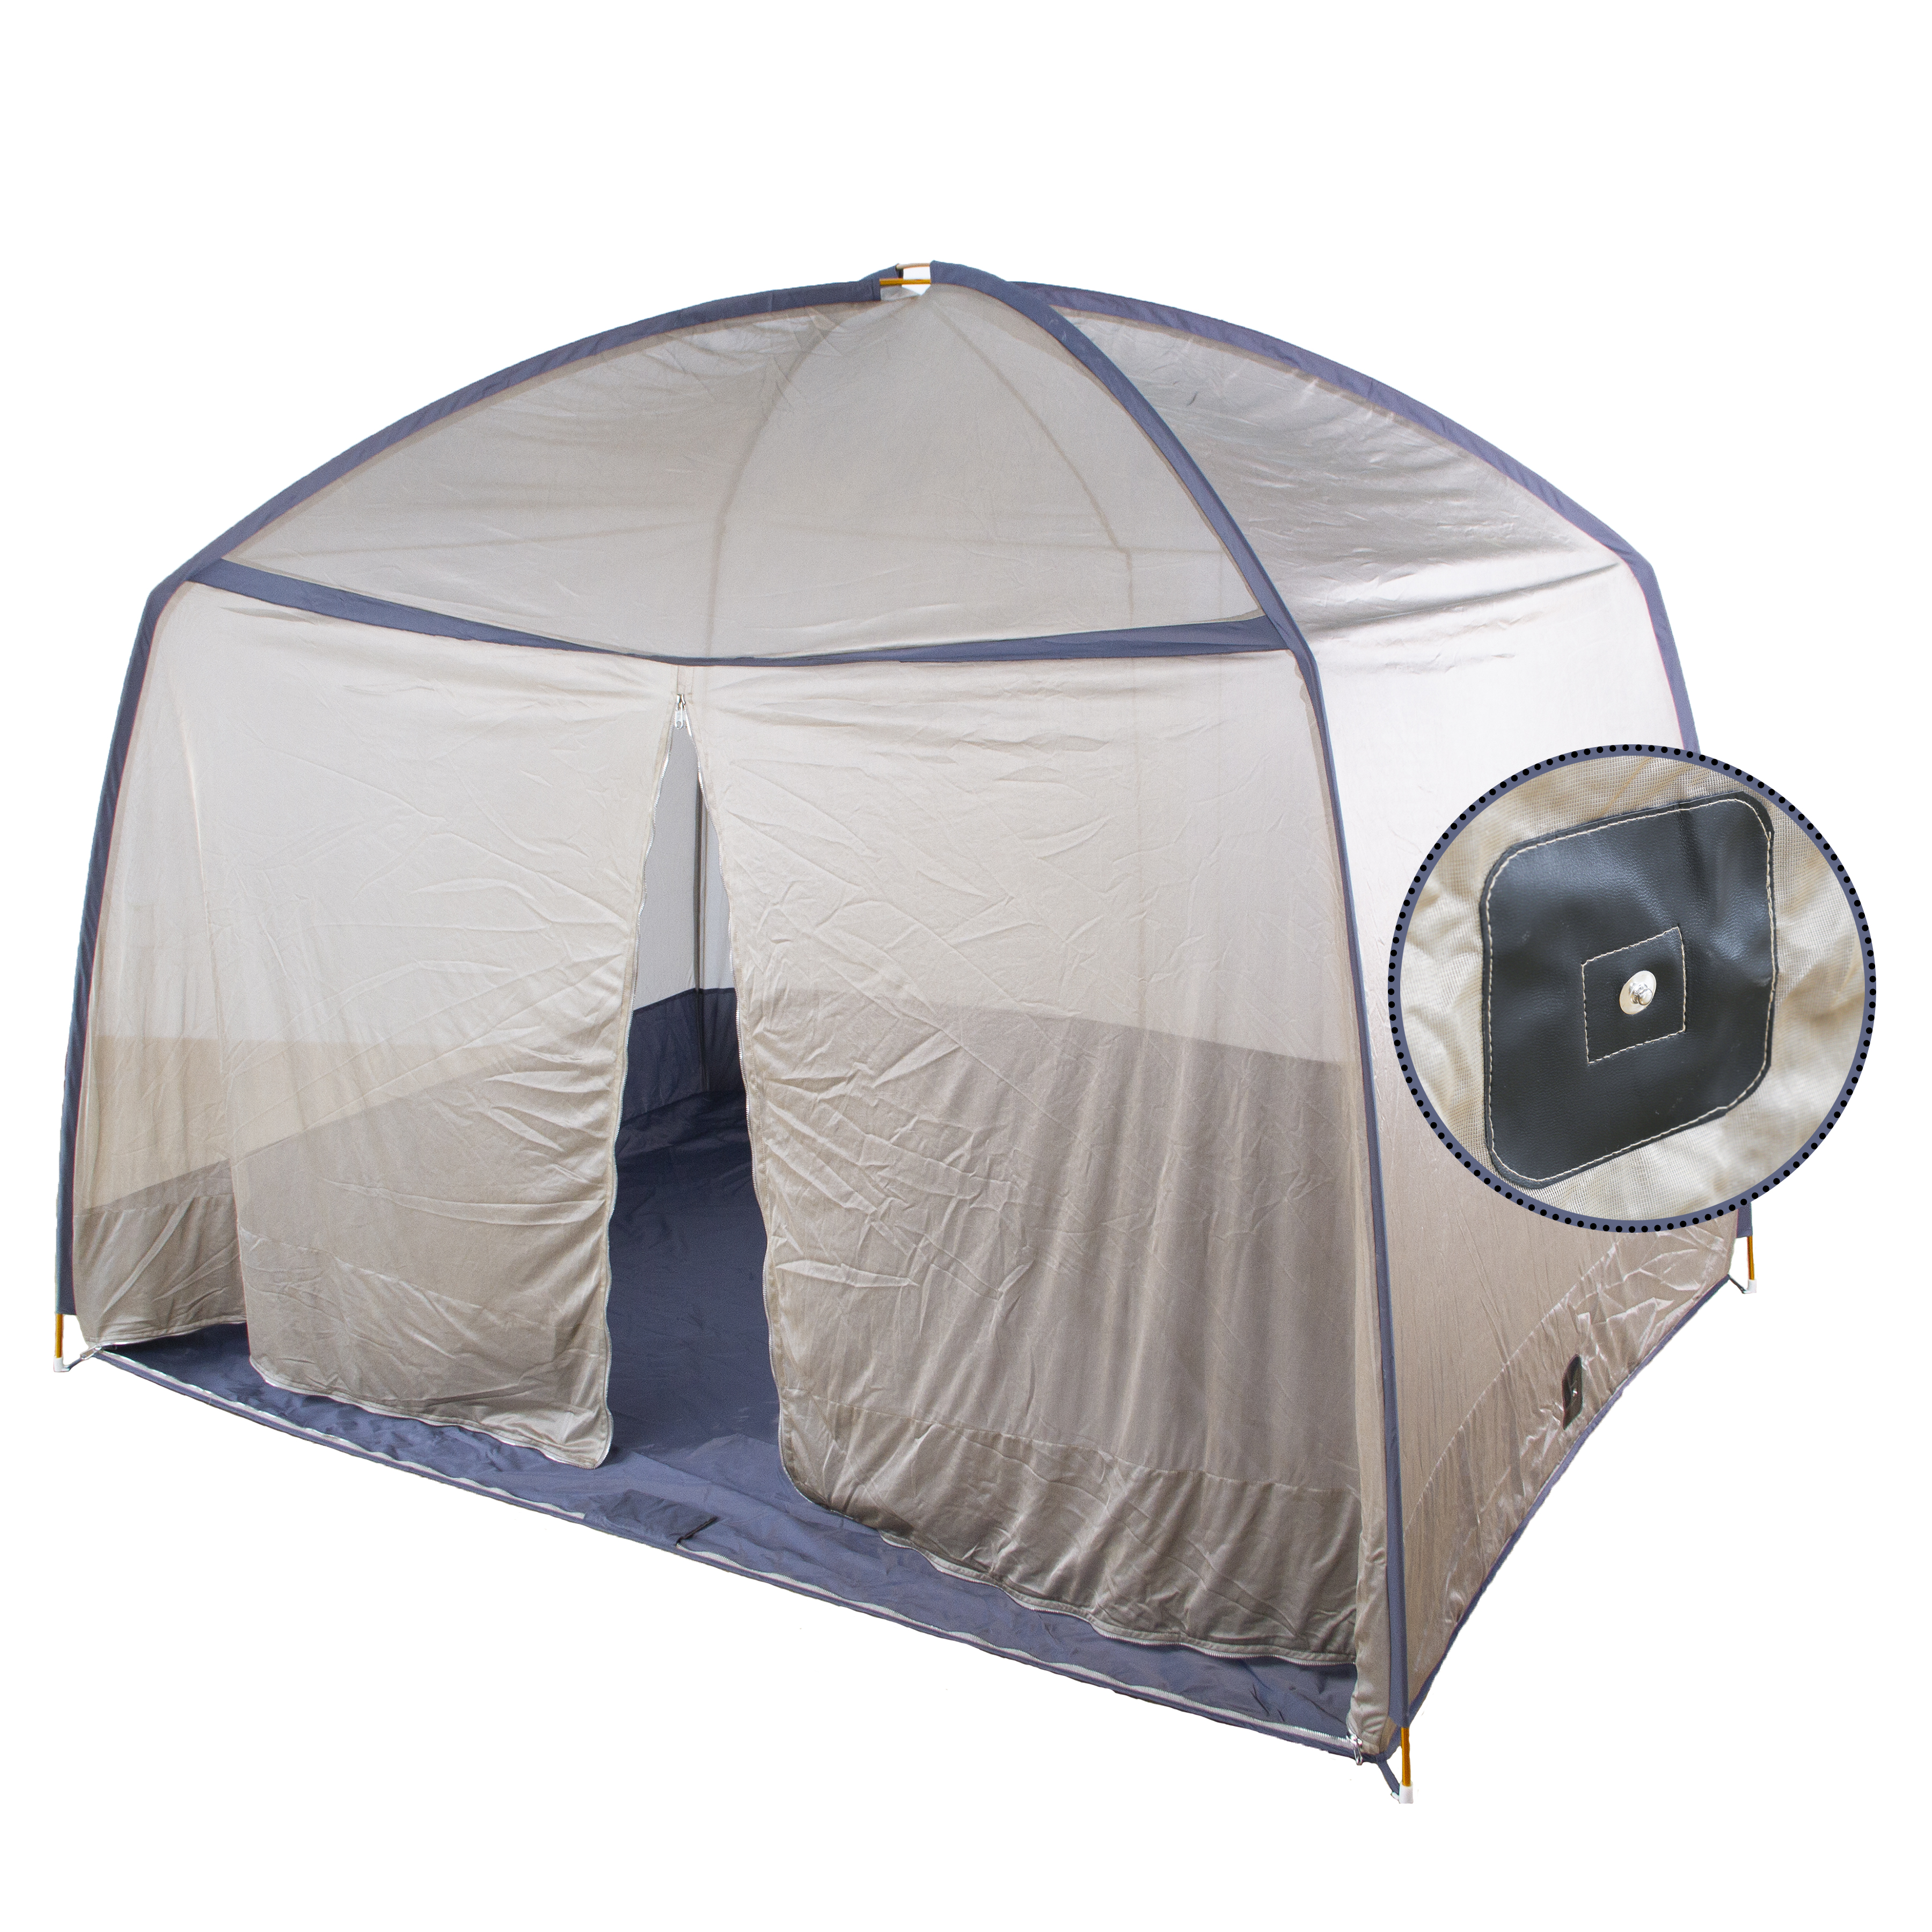  Fully enclosed electromagnetic wave shielding Faraday tent with zipper and silver-plated cloth